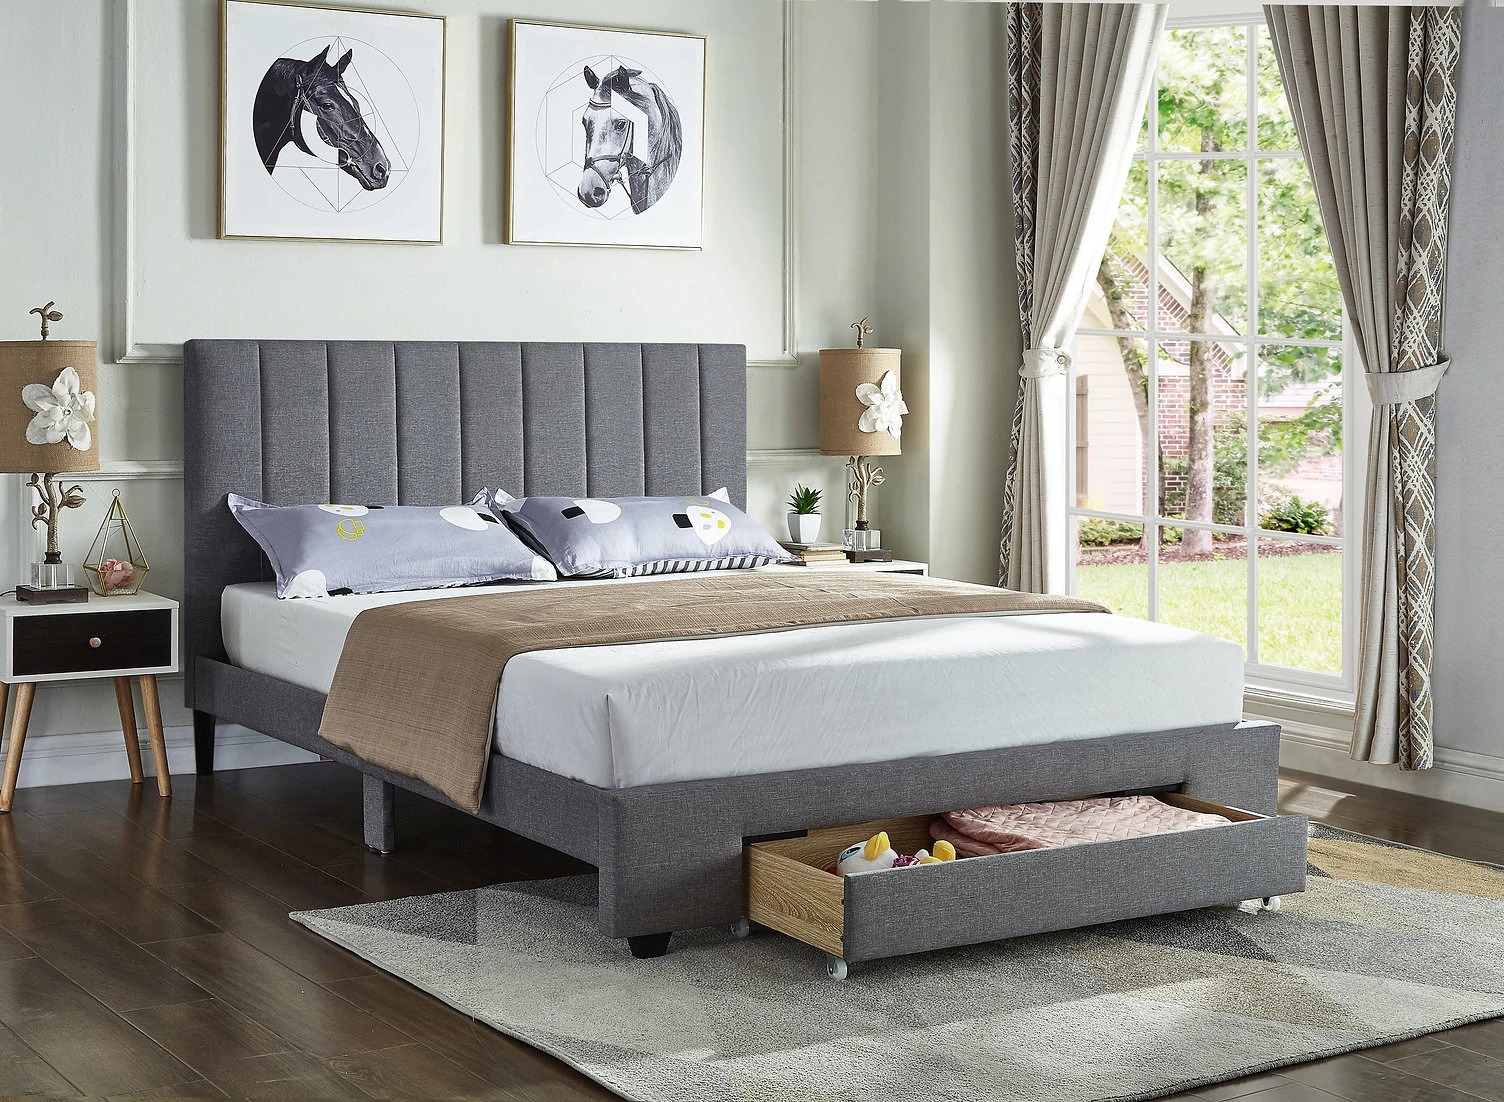 Common Mistakes People Make When Buying Beds